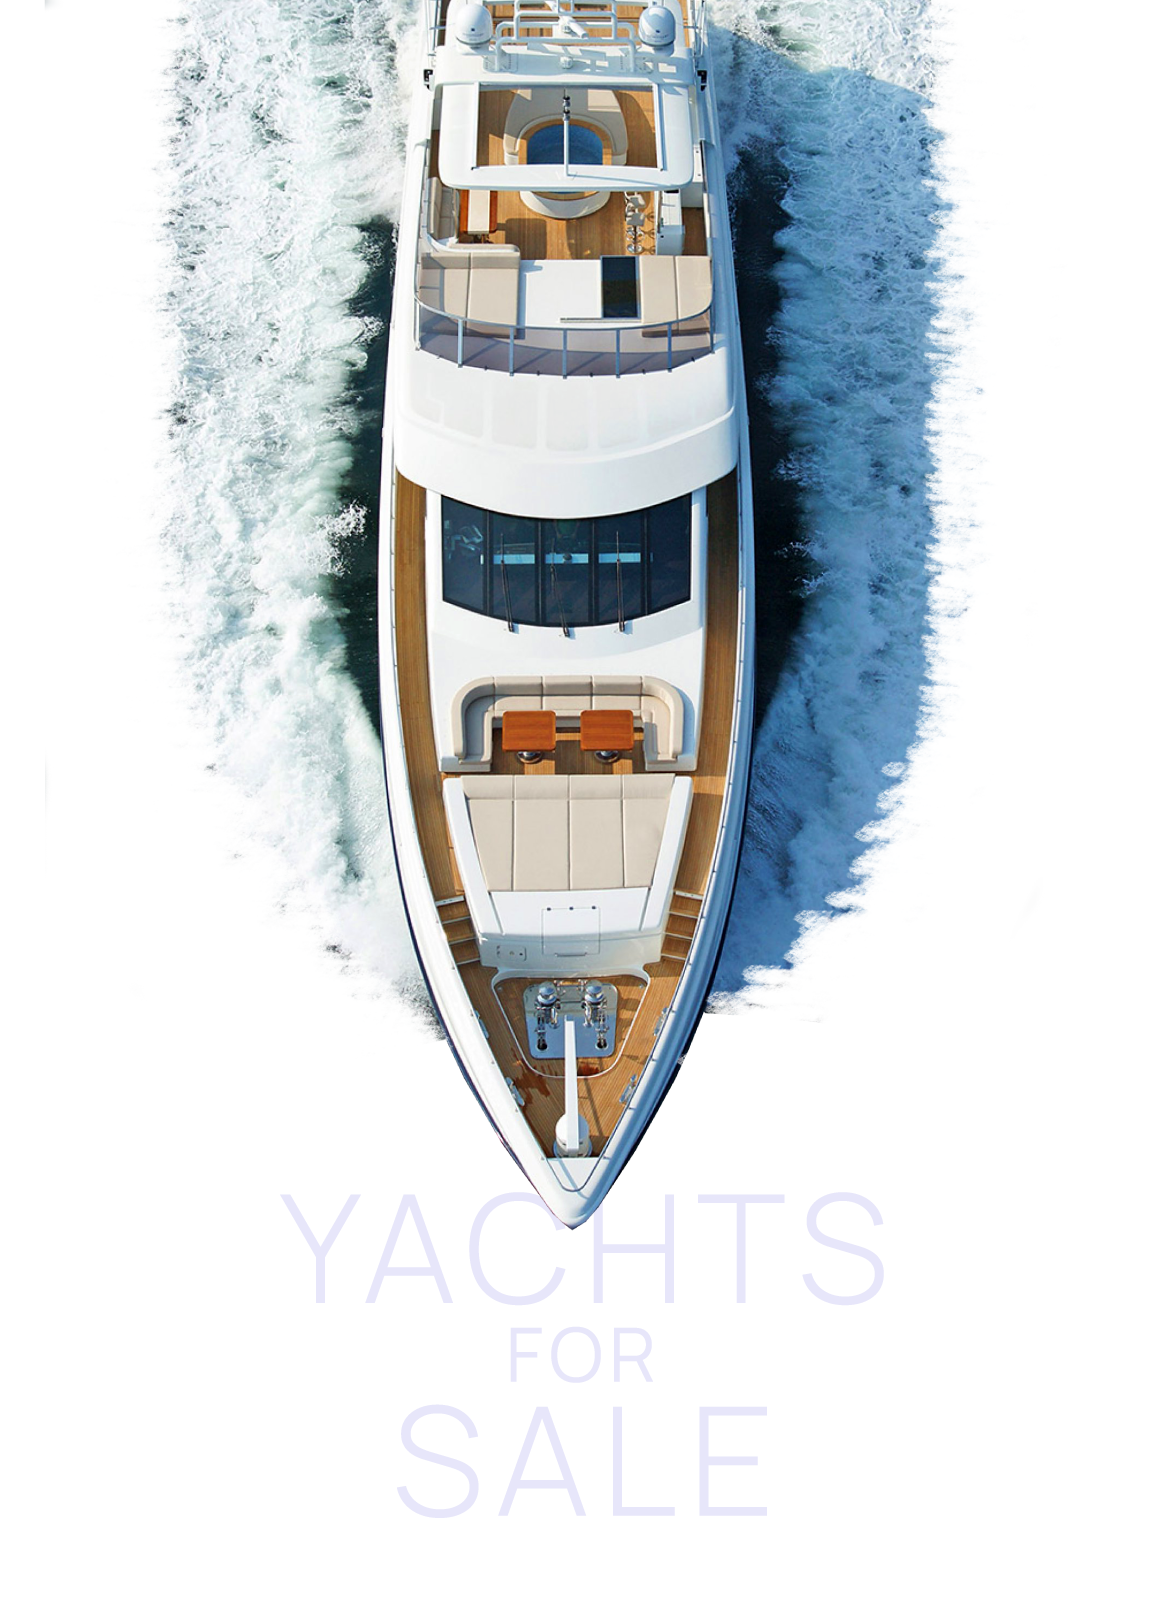 aylines yachts for sale